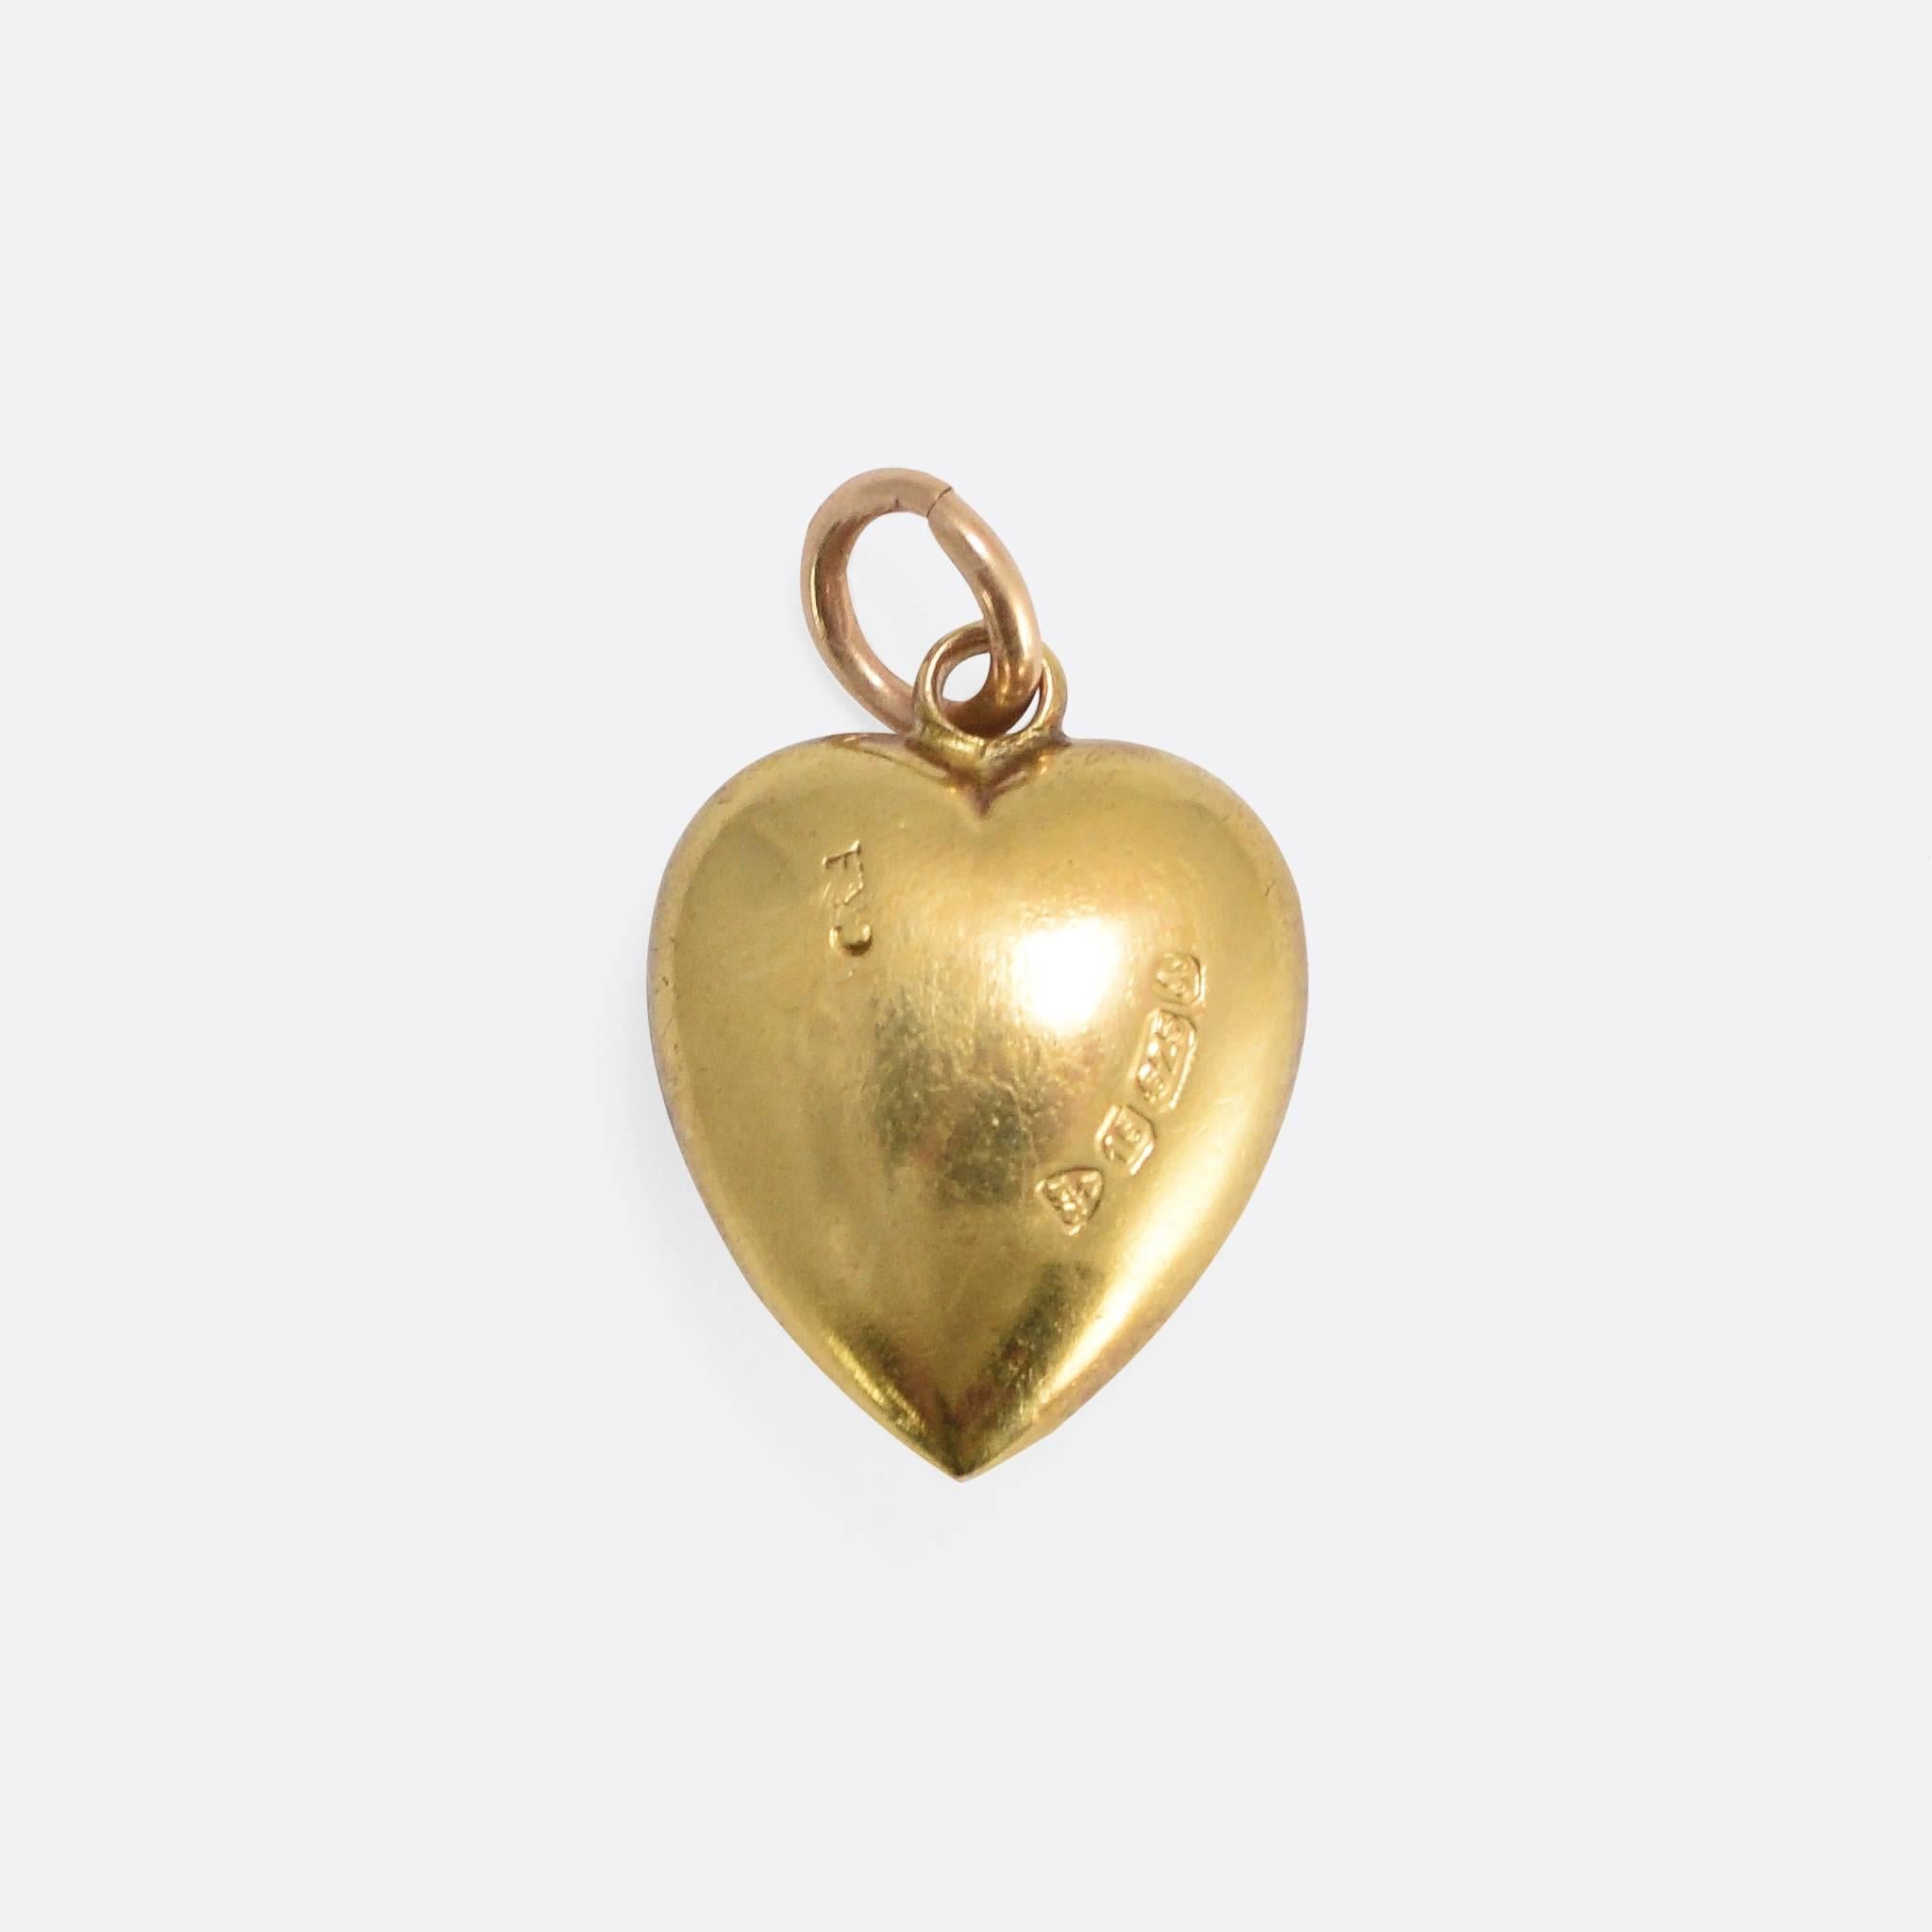 This sentimental puffed heart pendant was made right at the end of the Victorian Era. Modelled in 15k gold, it’s set with a turquoise cabochon and rose cut diamonds – all in a central star motif. The piece bears clear English hallmarks for the year